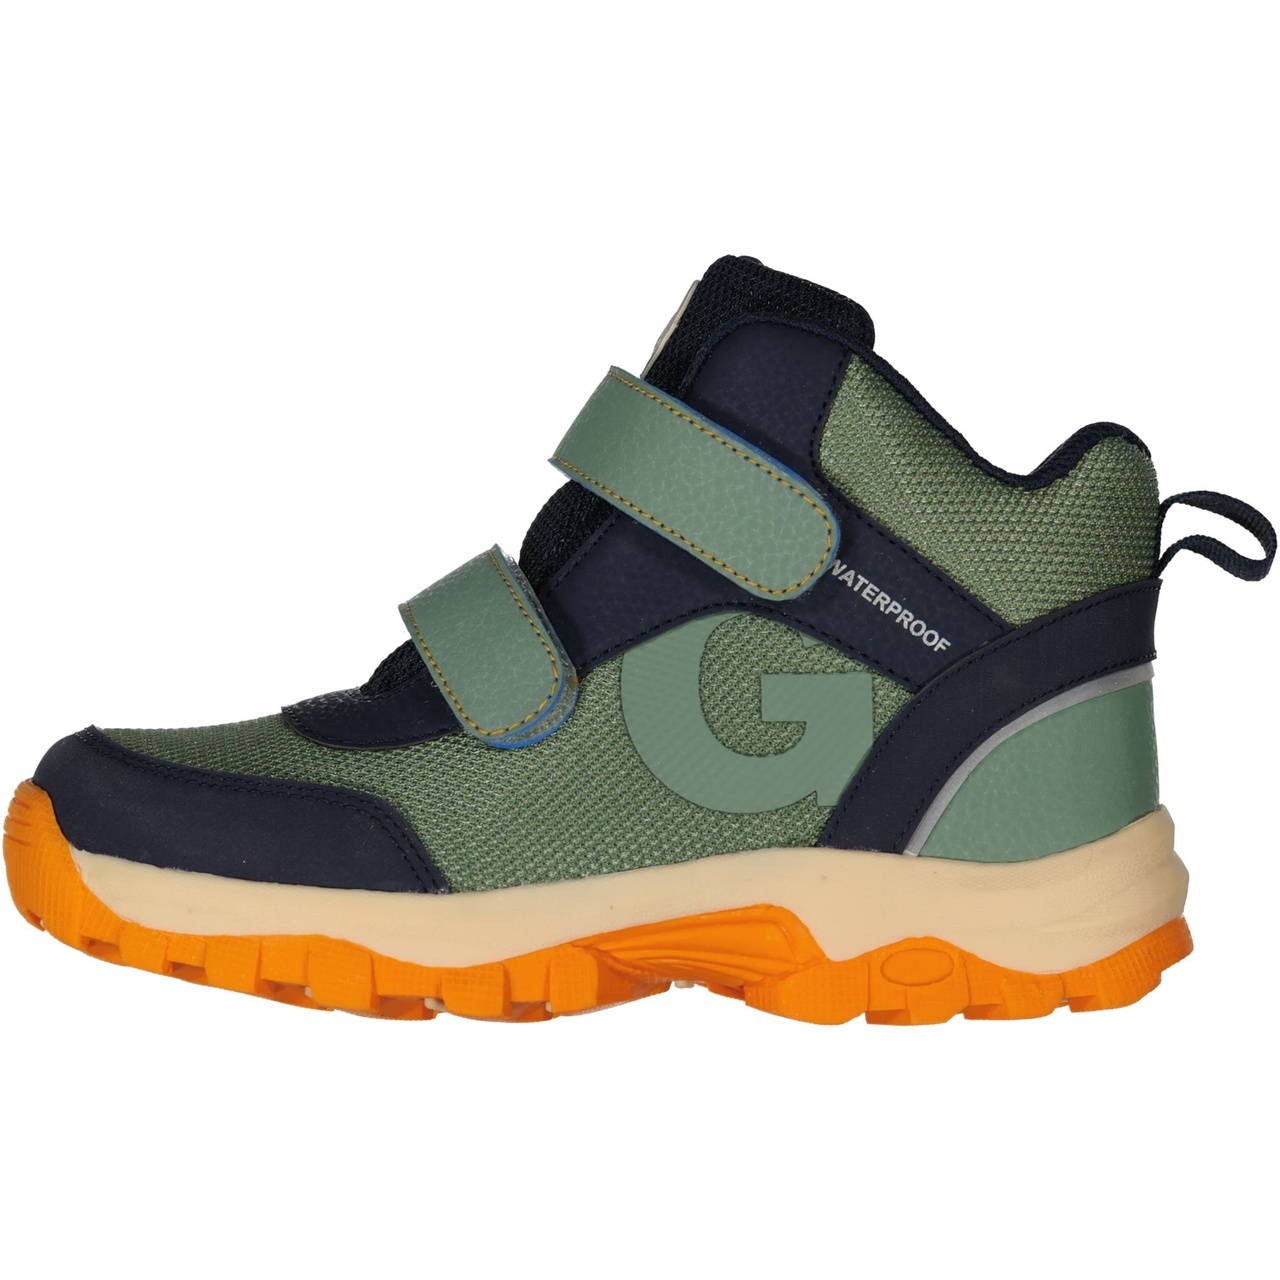 All weather shoes Moss green  28 (18,4 cm)